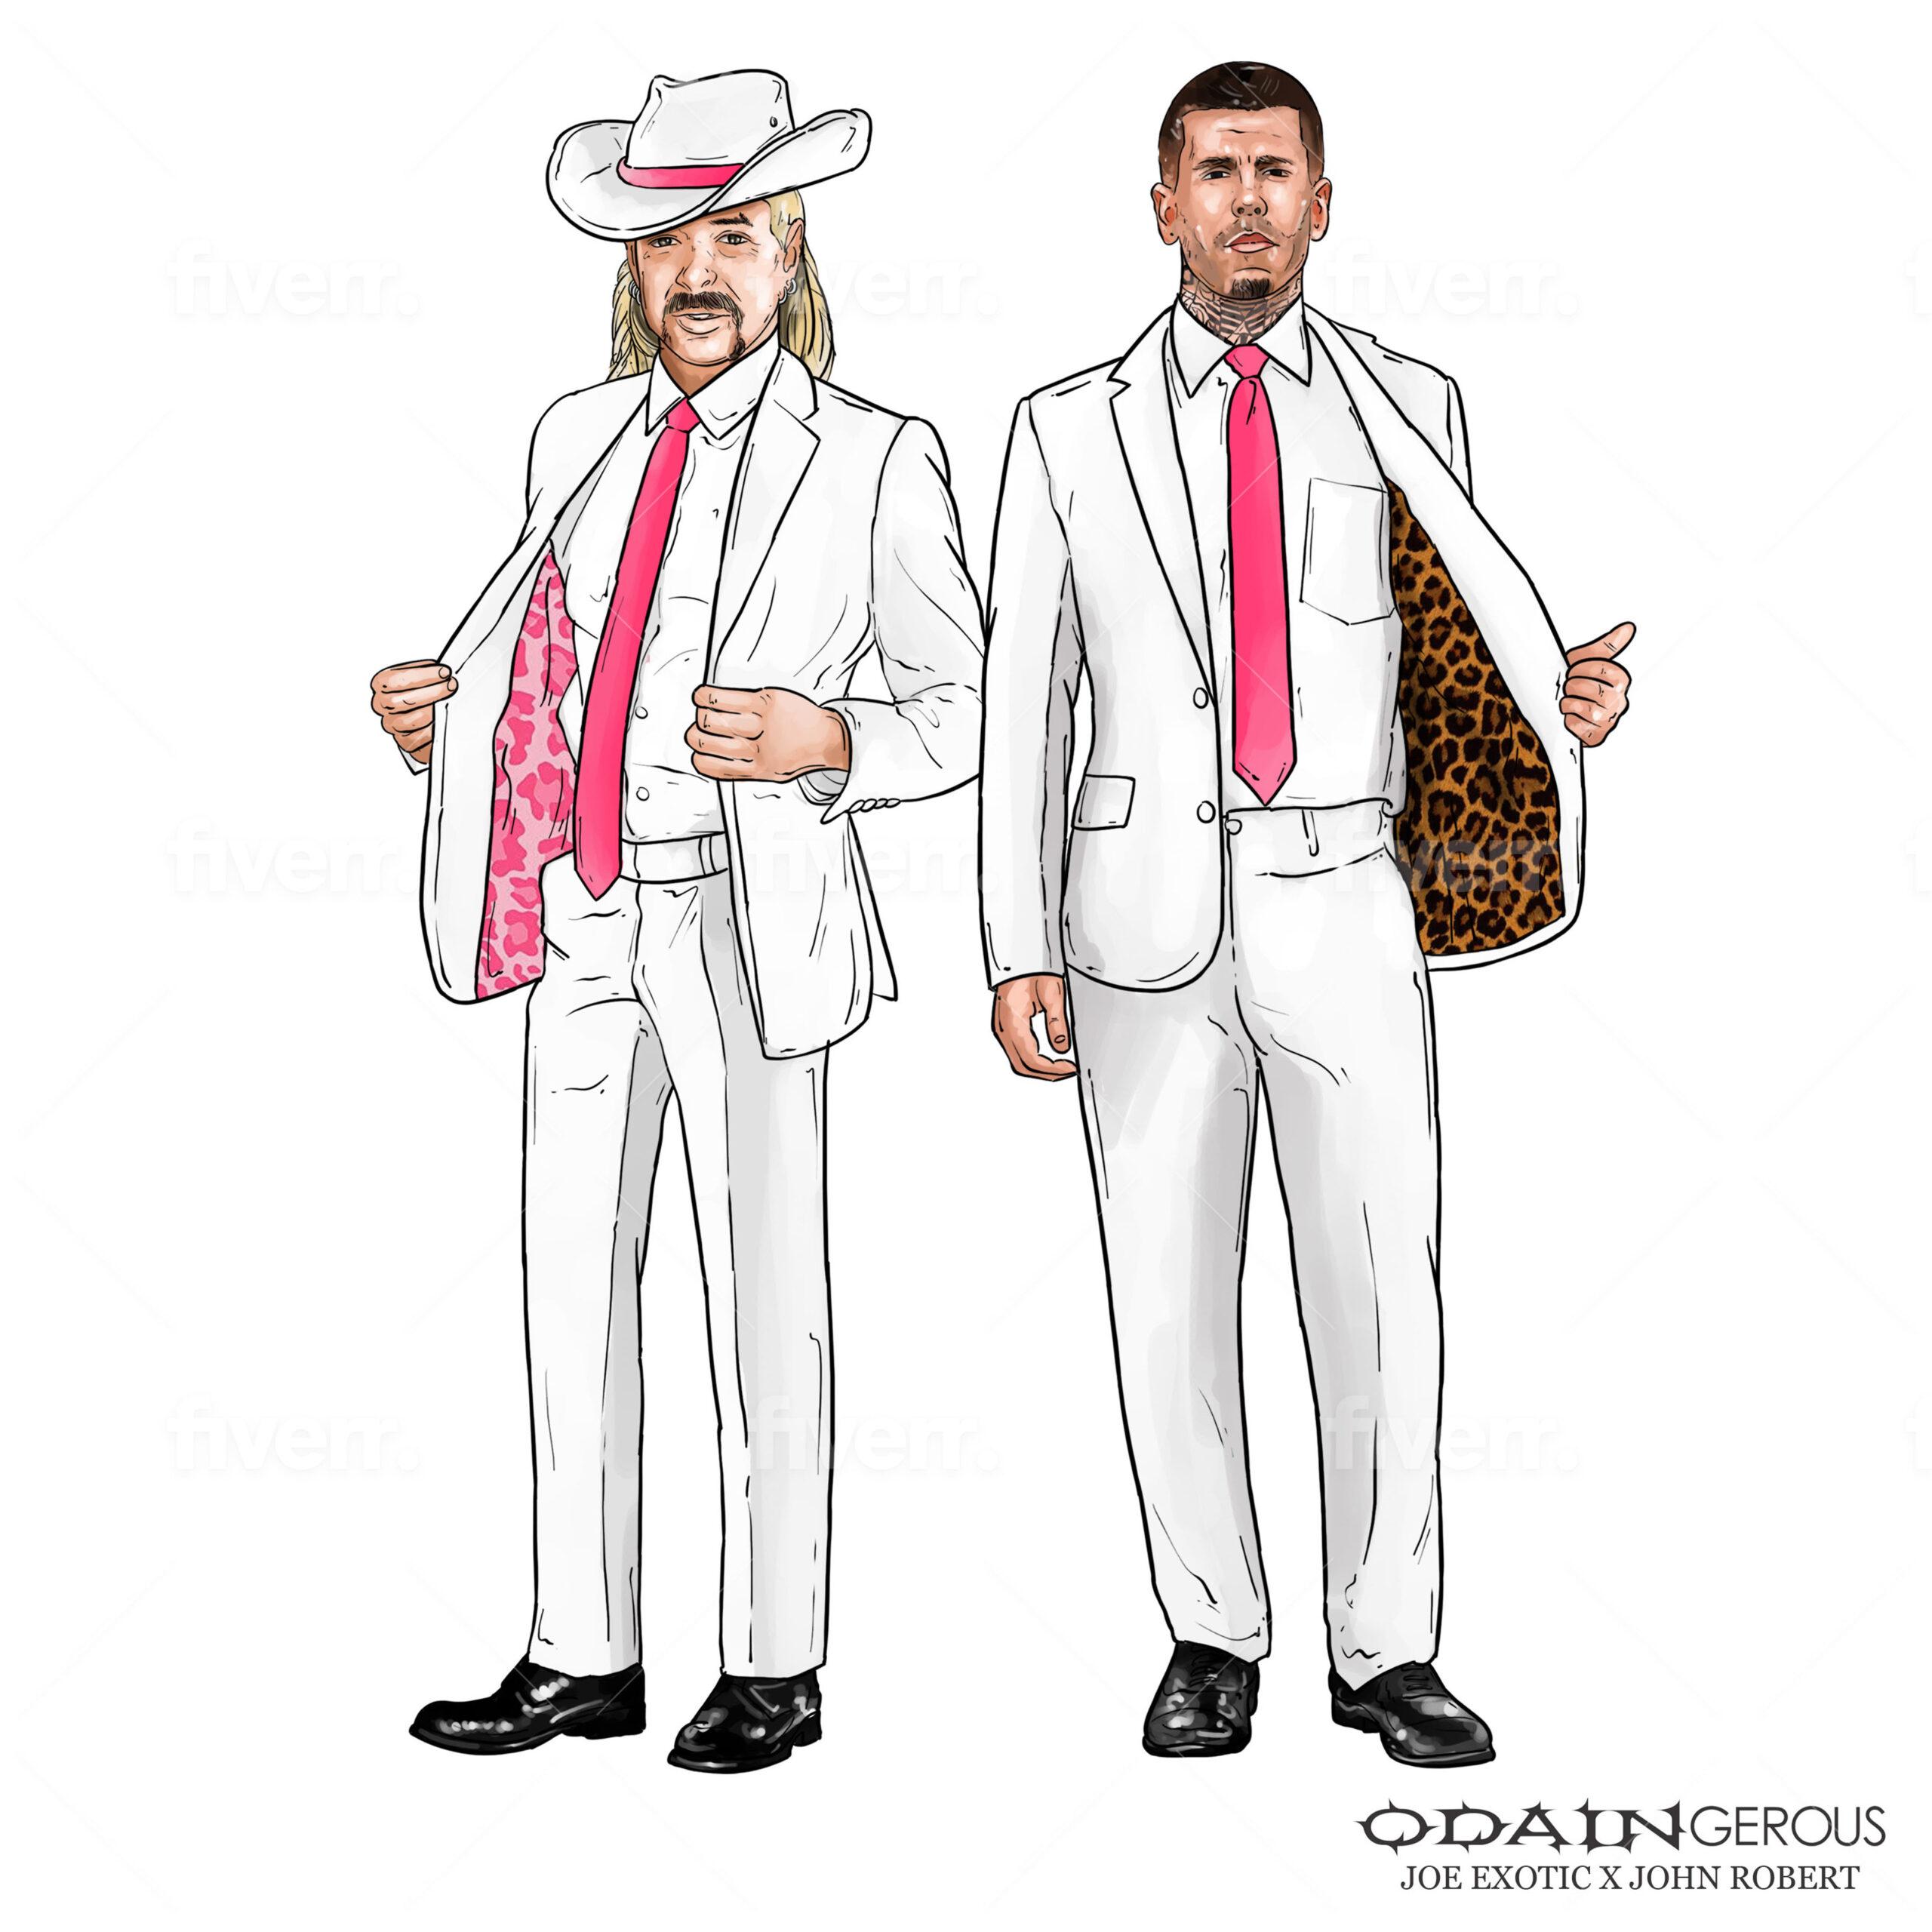 Tiger King’s Joe Exotic and fiance John Graham are planning to wear these $11,500 all-white tuxedos with custom silk tiger print lining at their wedding. The jailed star is set to marry Graham after they met in prison and fashion designer Odain Watson of Odaingerous has been asked to design outfits for the wedding. As first revealed by TMZ.com, Joe will get the pink silk tiger print lining and John the traditional tiger print style. Odain has previously worked with Joe on a collection of streetwear, custom shoes and a line of underwear. It will take around four to six weeks to make the tuxes. *BYLINE: Odaingerous Inc./TMZ/Mega. 29 Apr 2022 Pictured: Tiger King’s Joe Exotic and fiance John Graham are planning to wear these $11,500 all-white tuxedos with custom silk tiger print lining at their wedding.